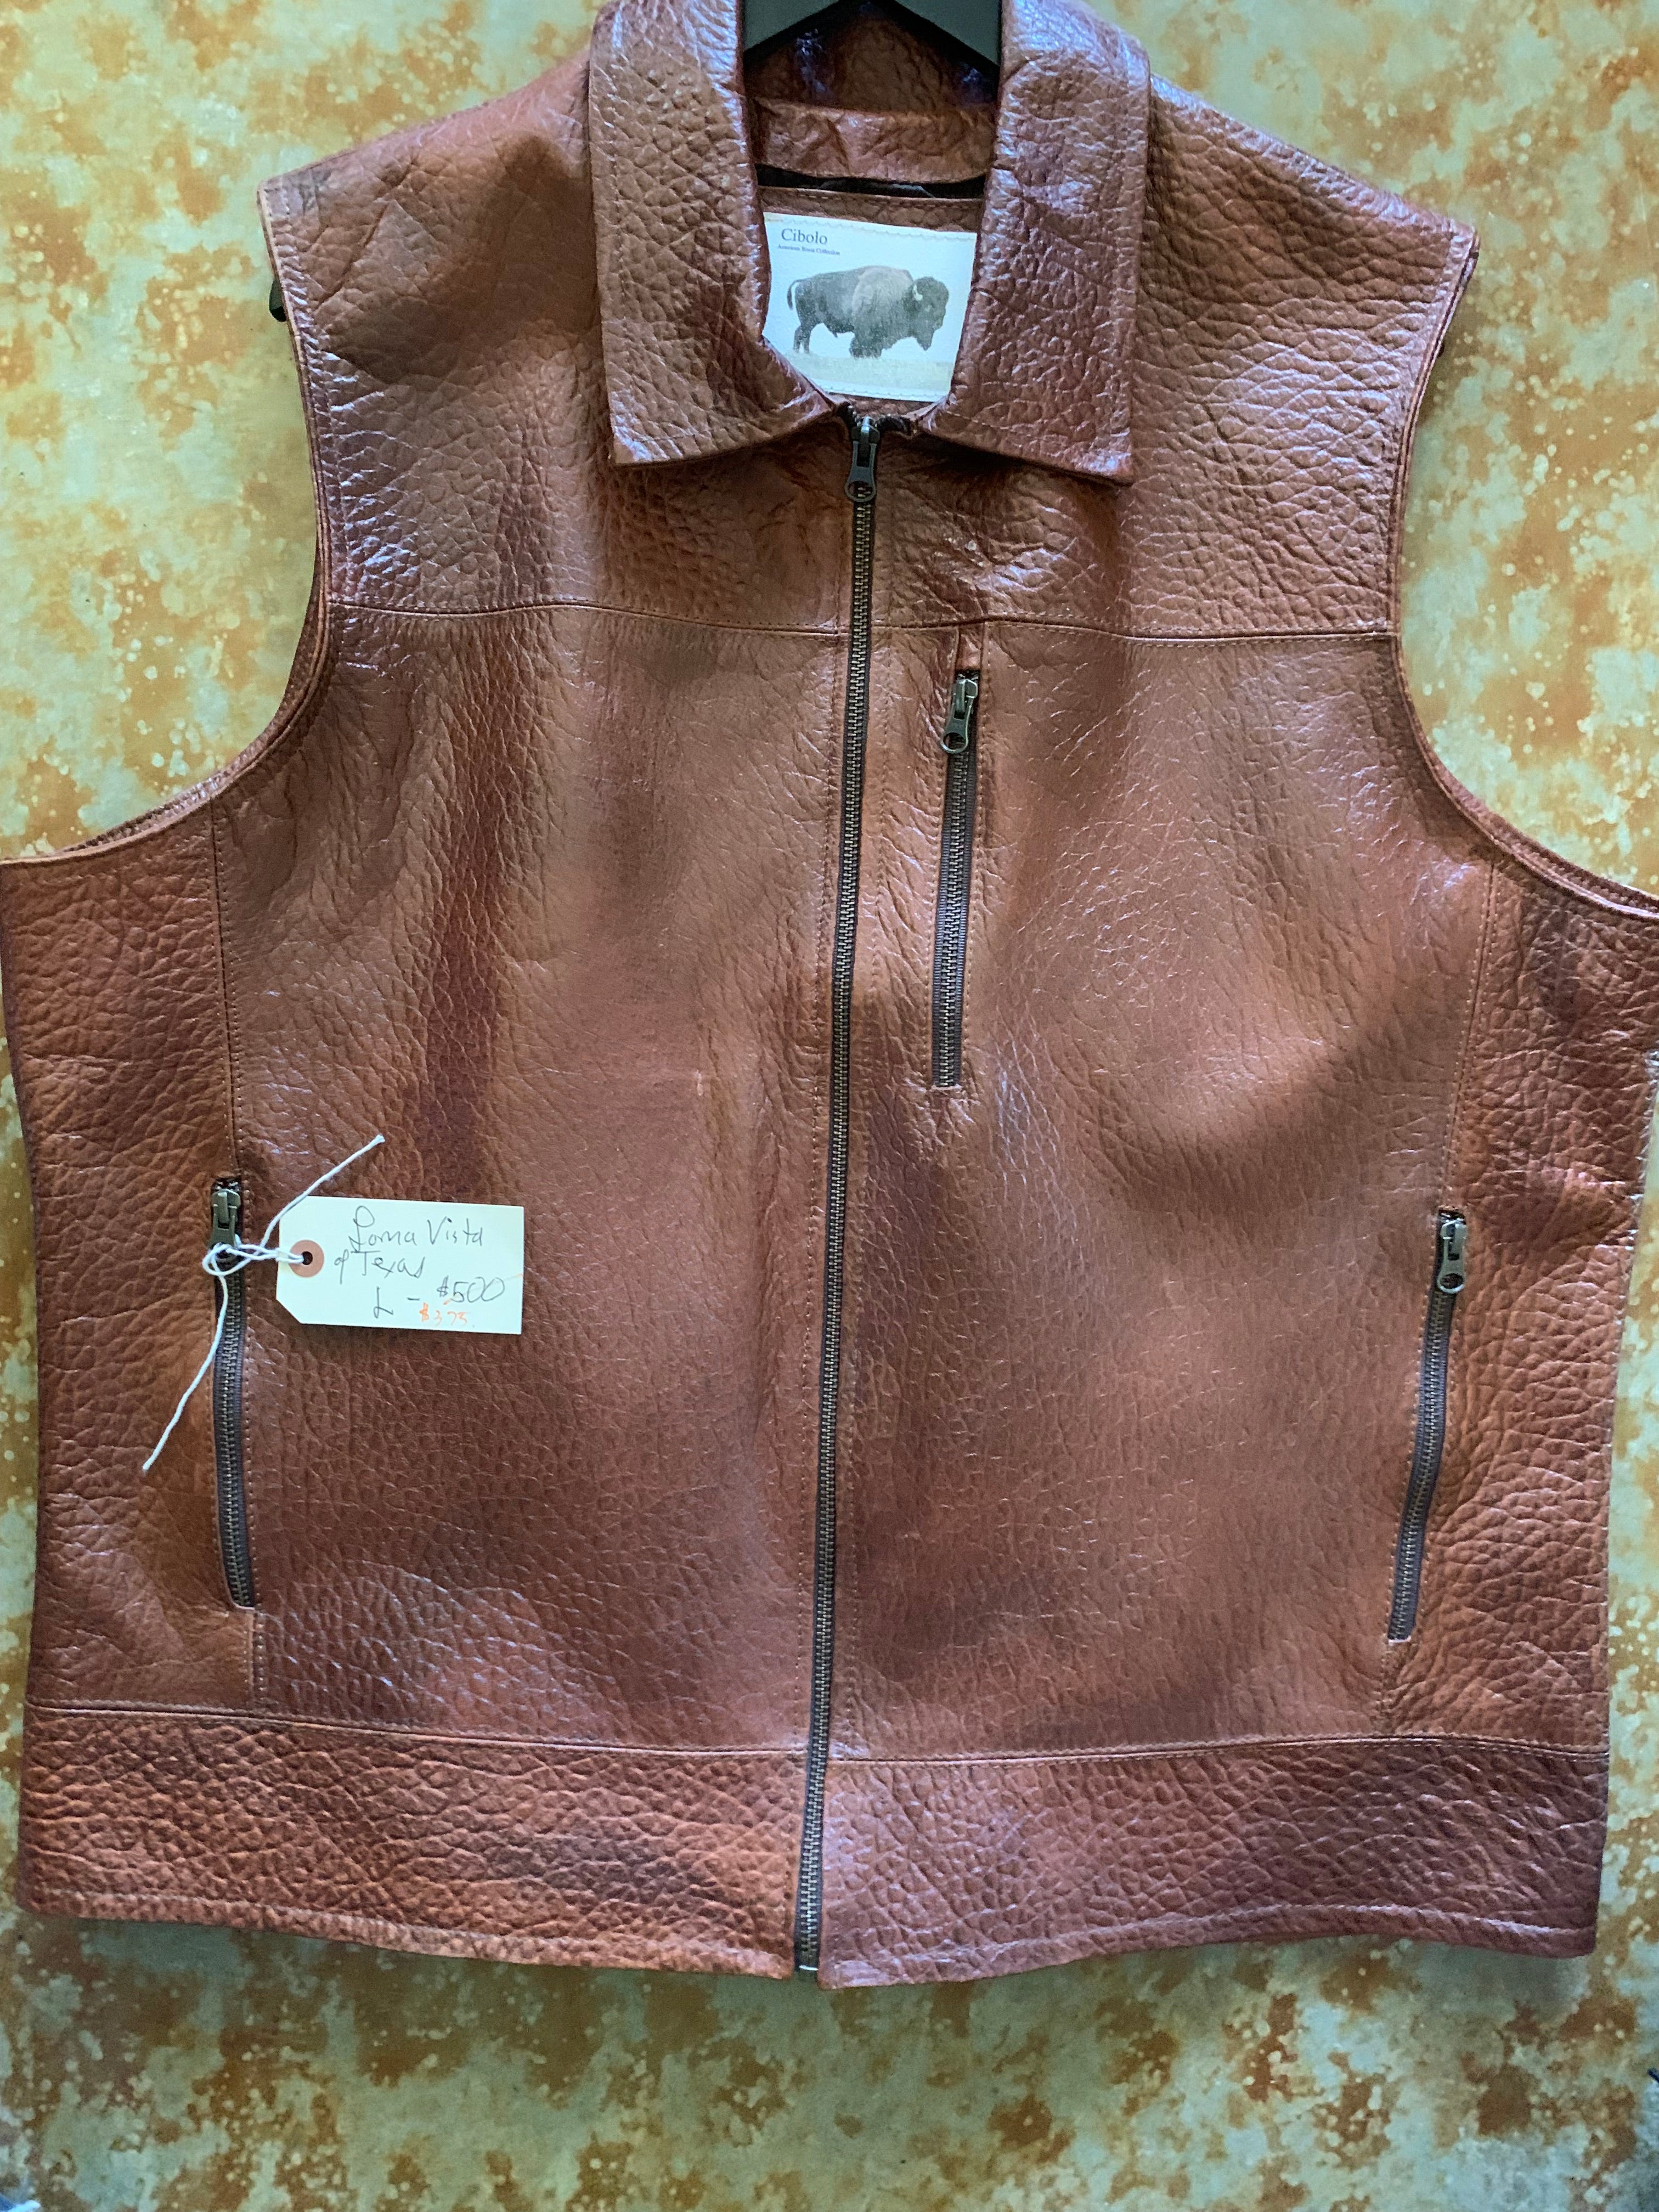 Loma Vista of Texas - Special Edition collared bison leather vest - large